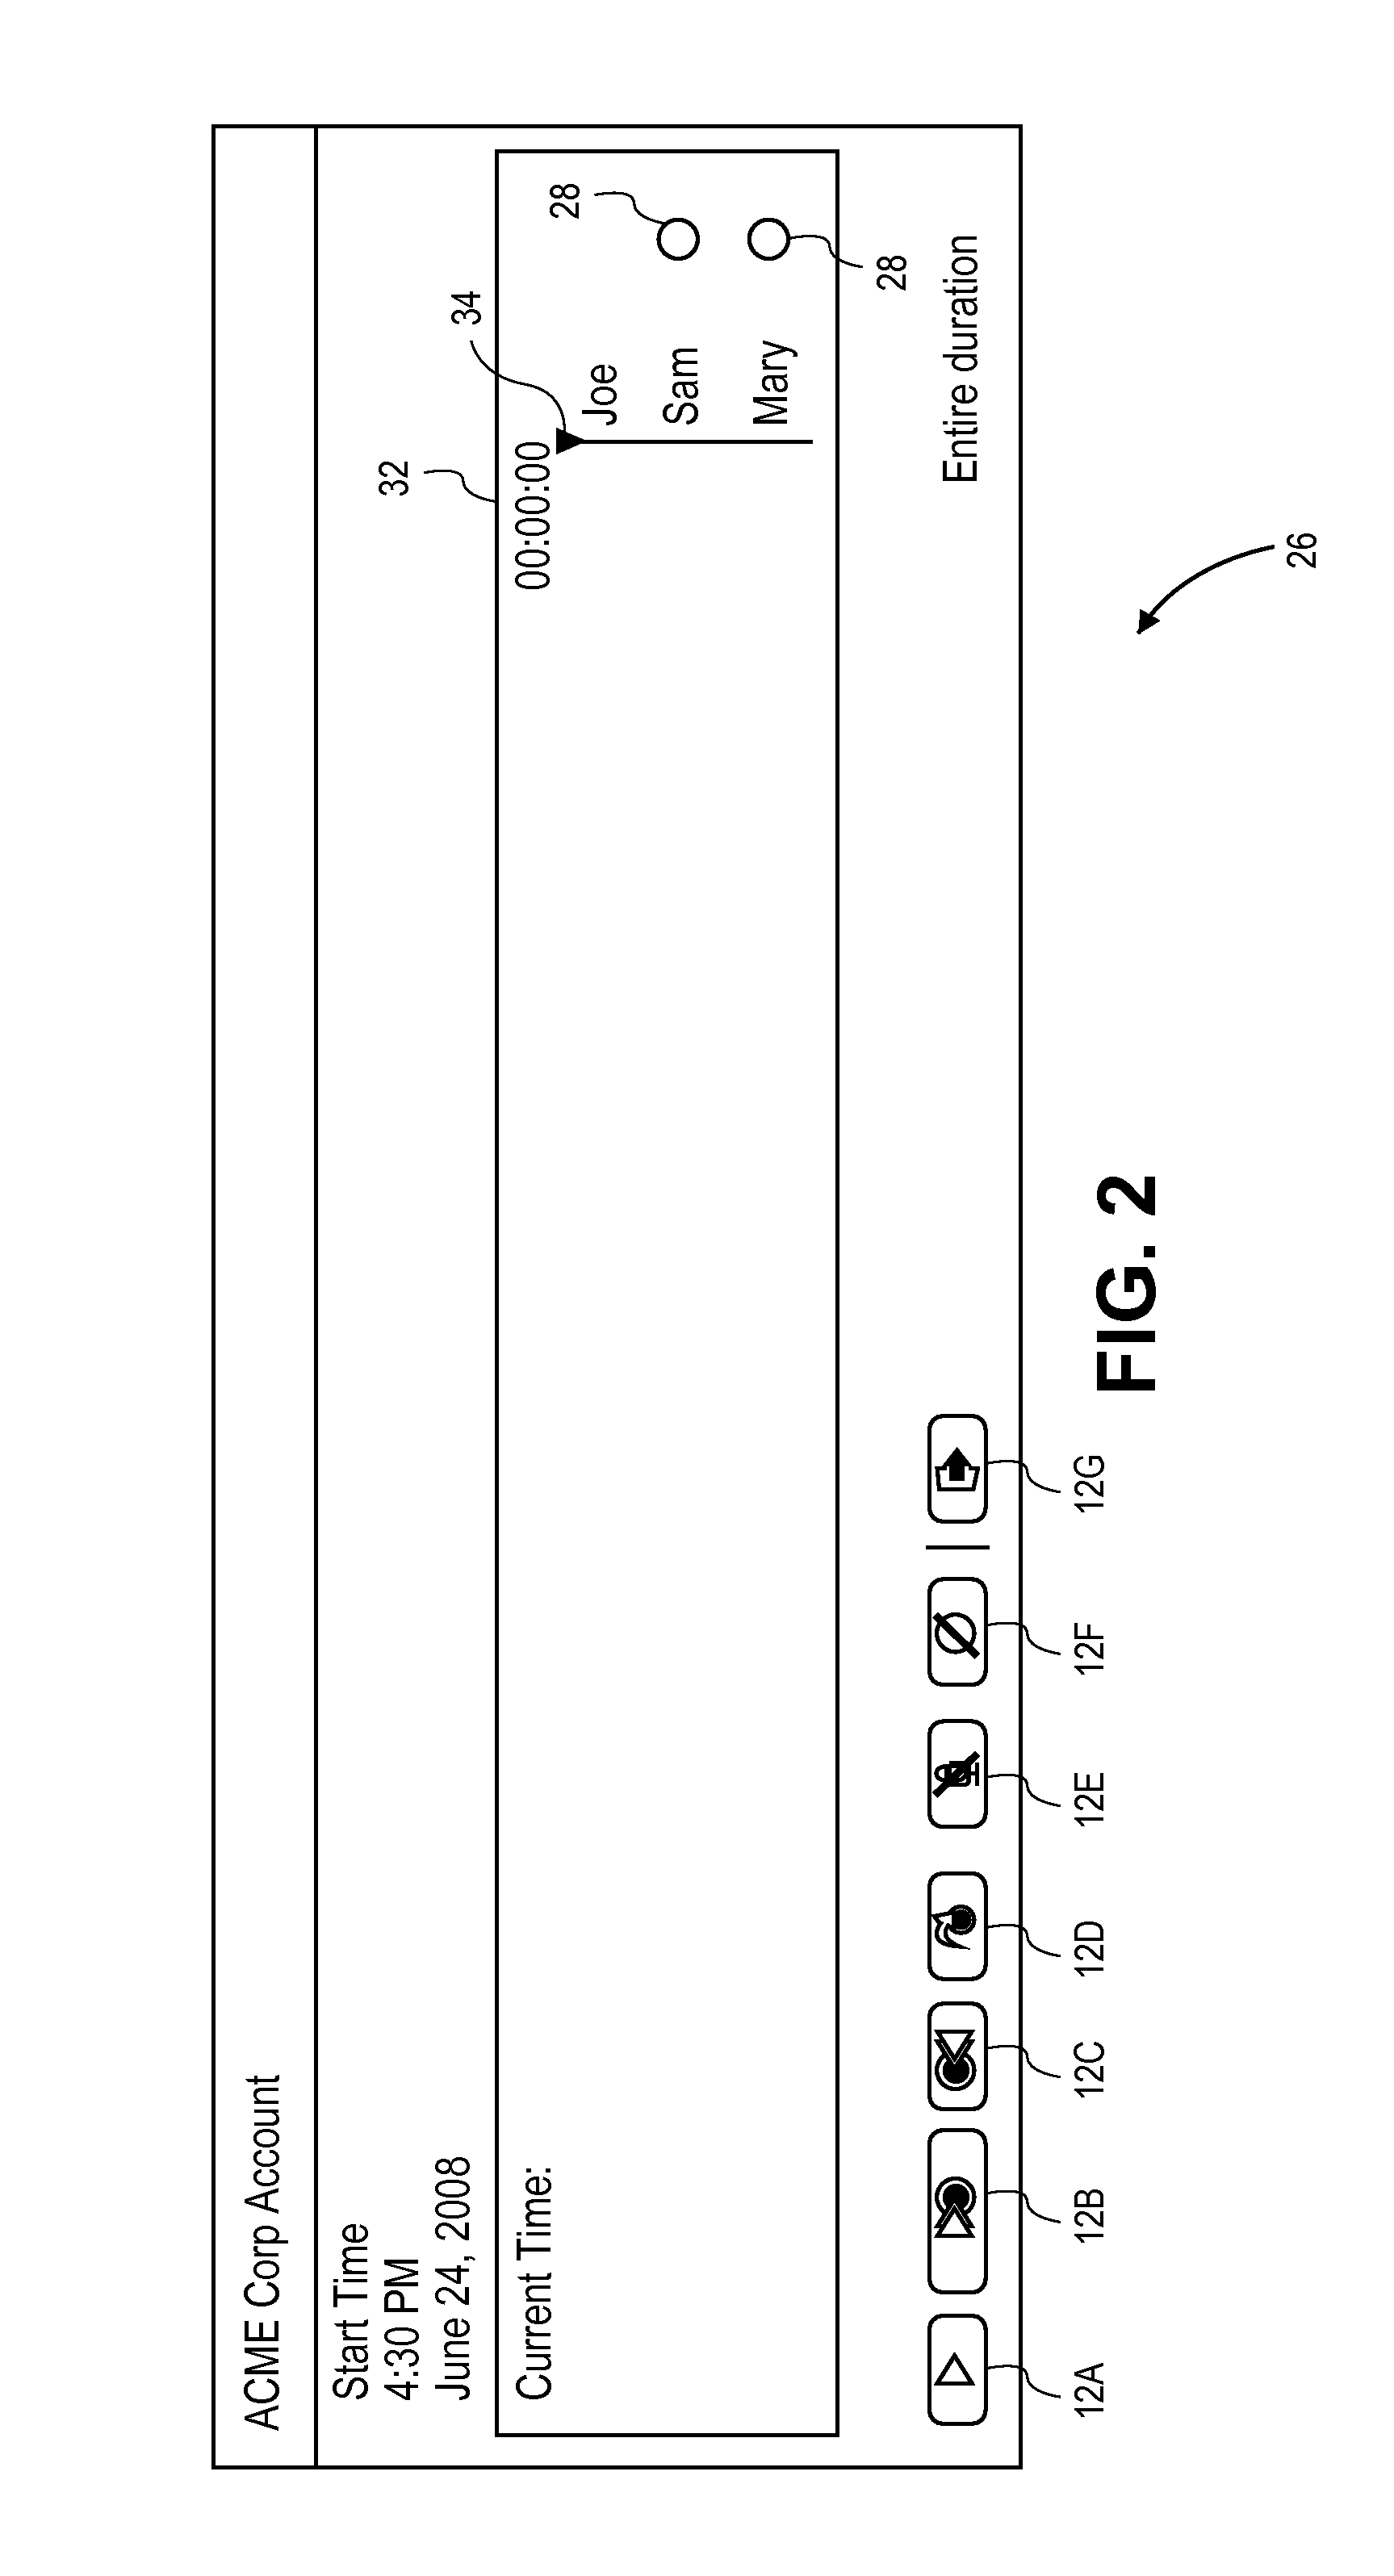 User interface for a telecommunication and multimedia management system and method